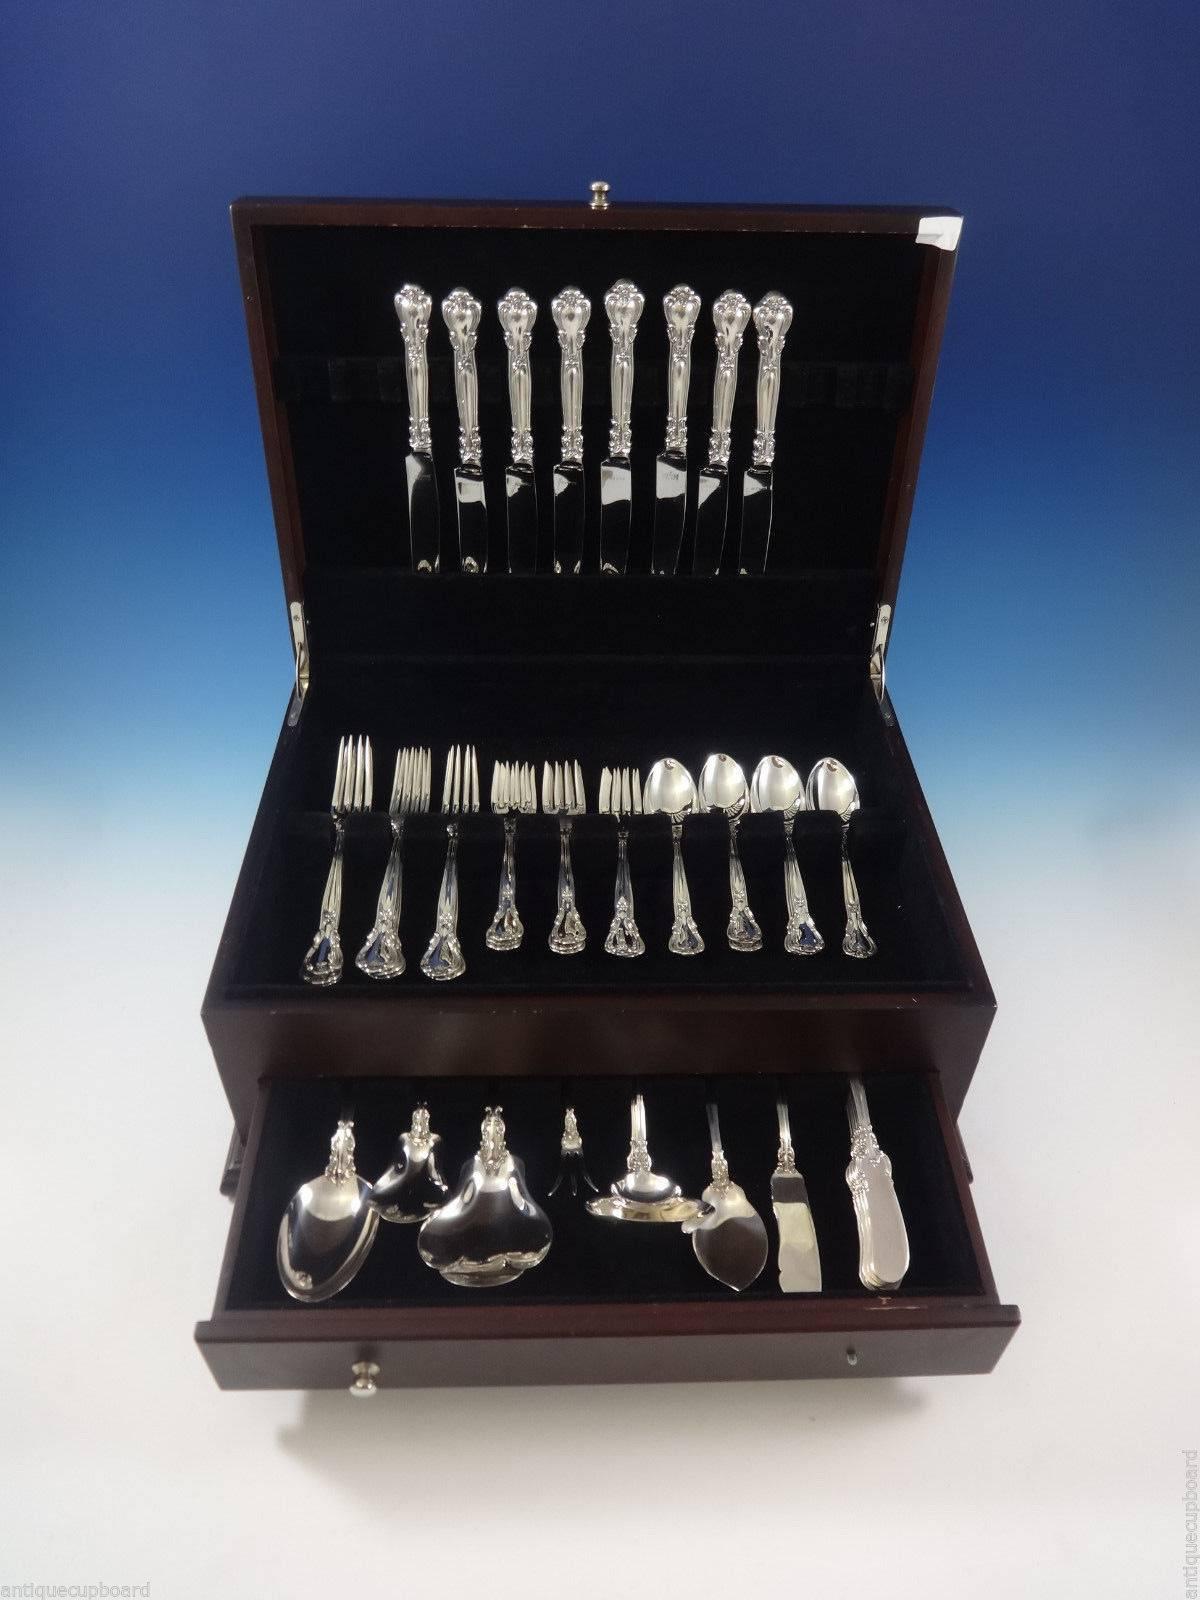 Chantilly by Gorham sterling silver flatware set of 48 pieces. This set includes:

Eight knives, 8 7/8